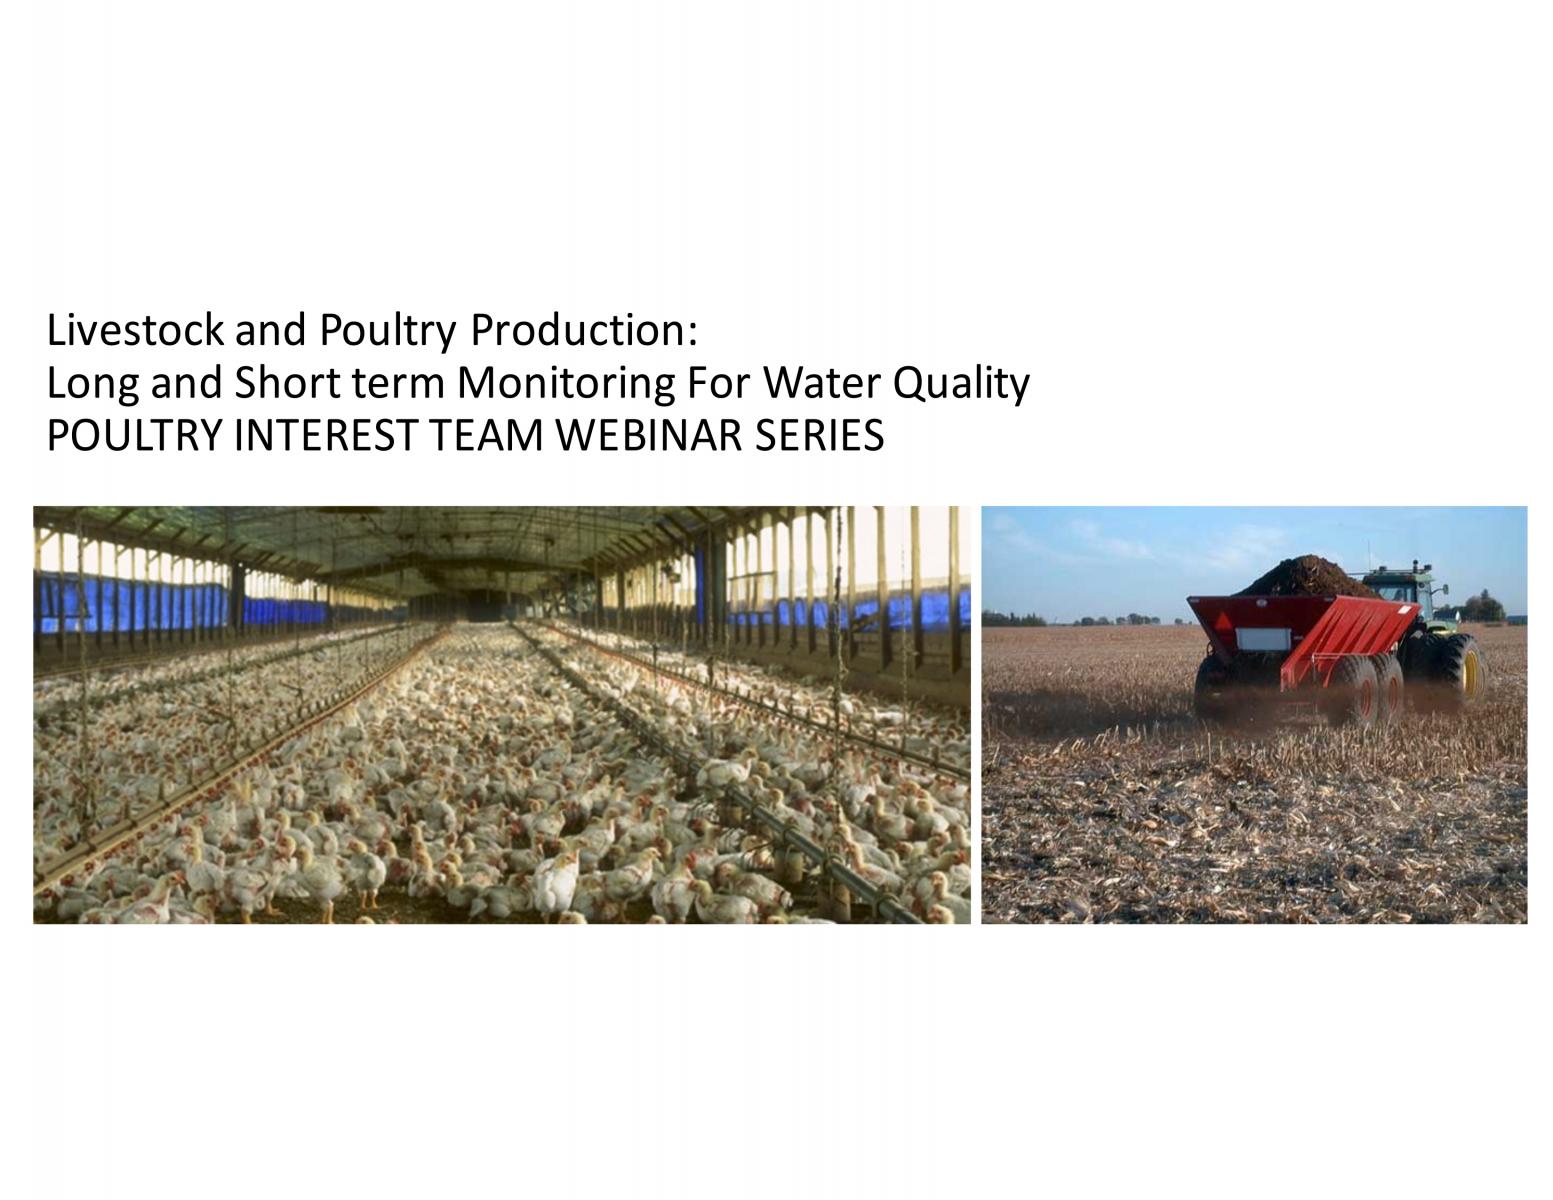 Monitoring for Poultry Production PowerPoint